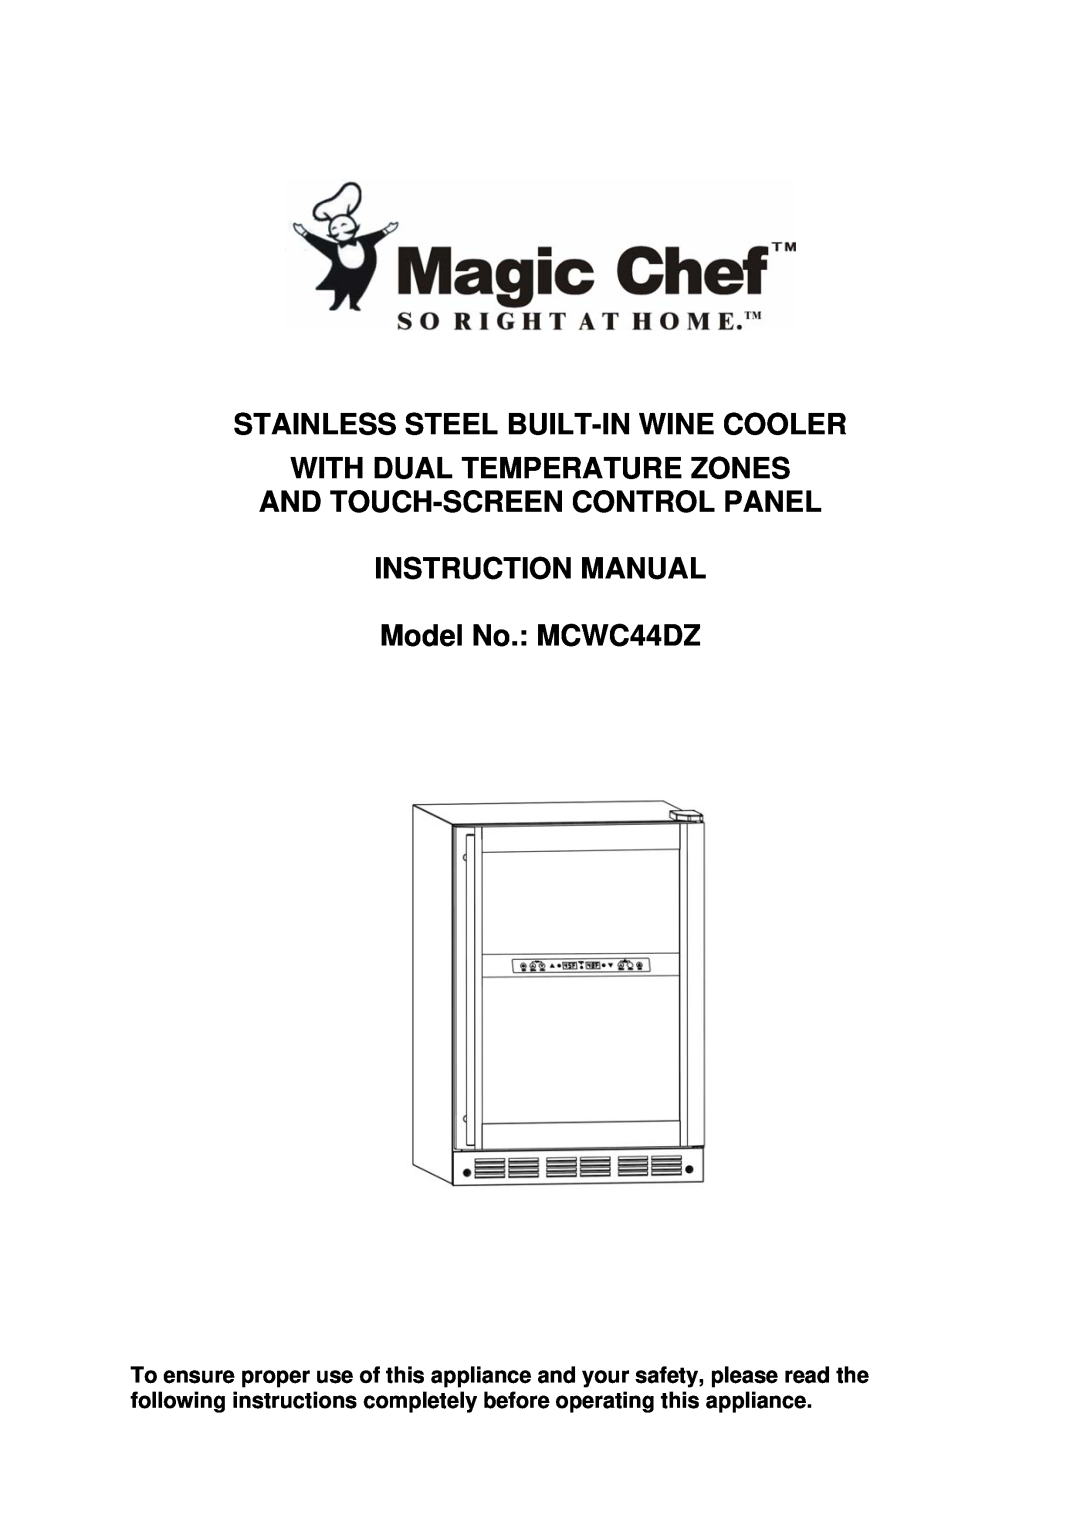 Magic Chef MCWC44DZ instruction manual Stainless Steel Built-Inwine Cooler, With Dual Temperature Zones 